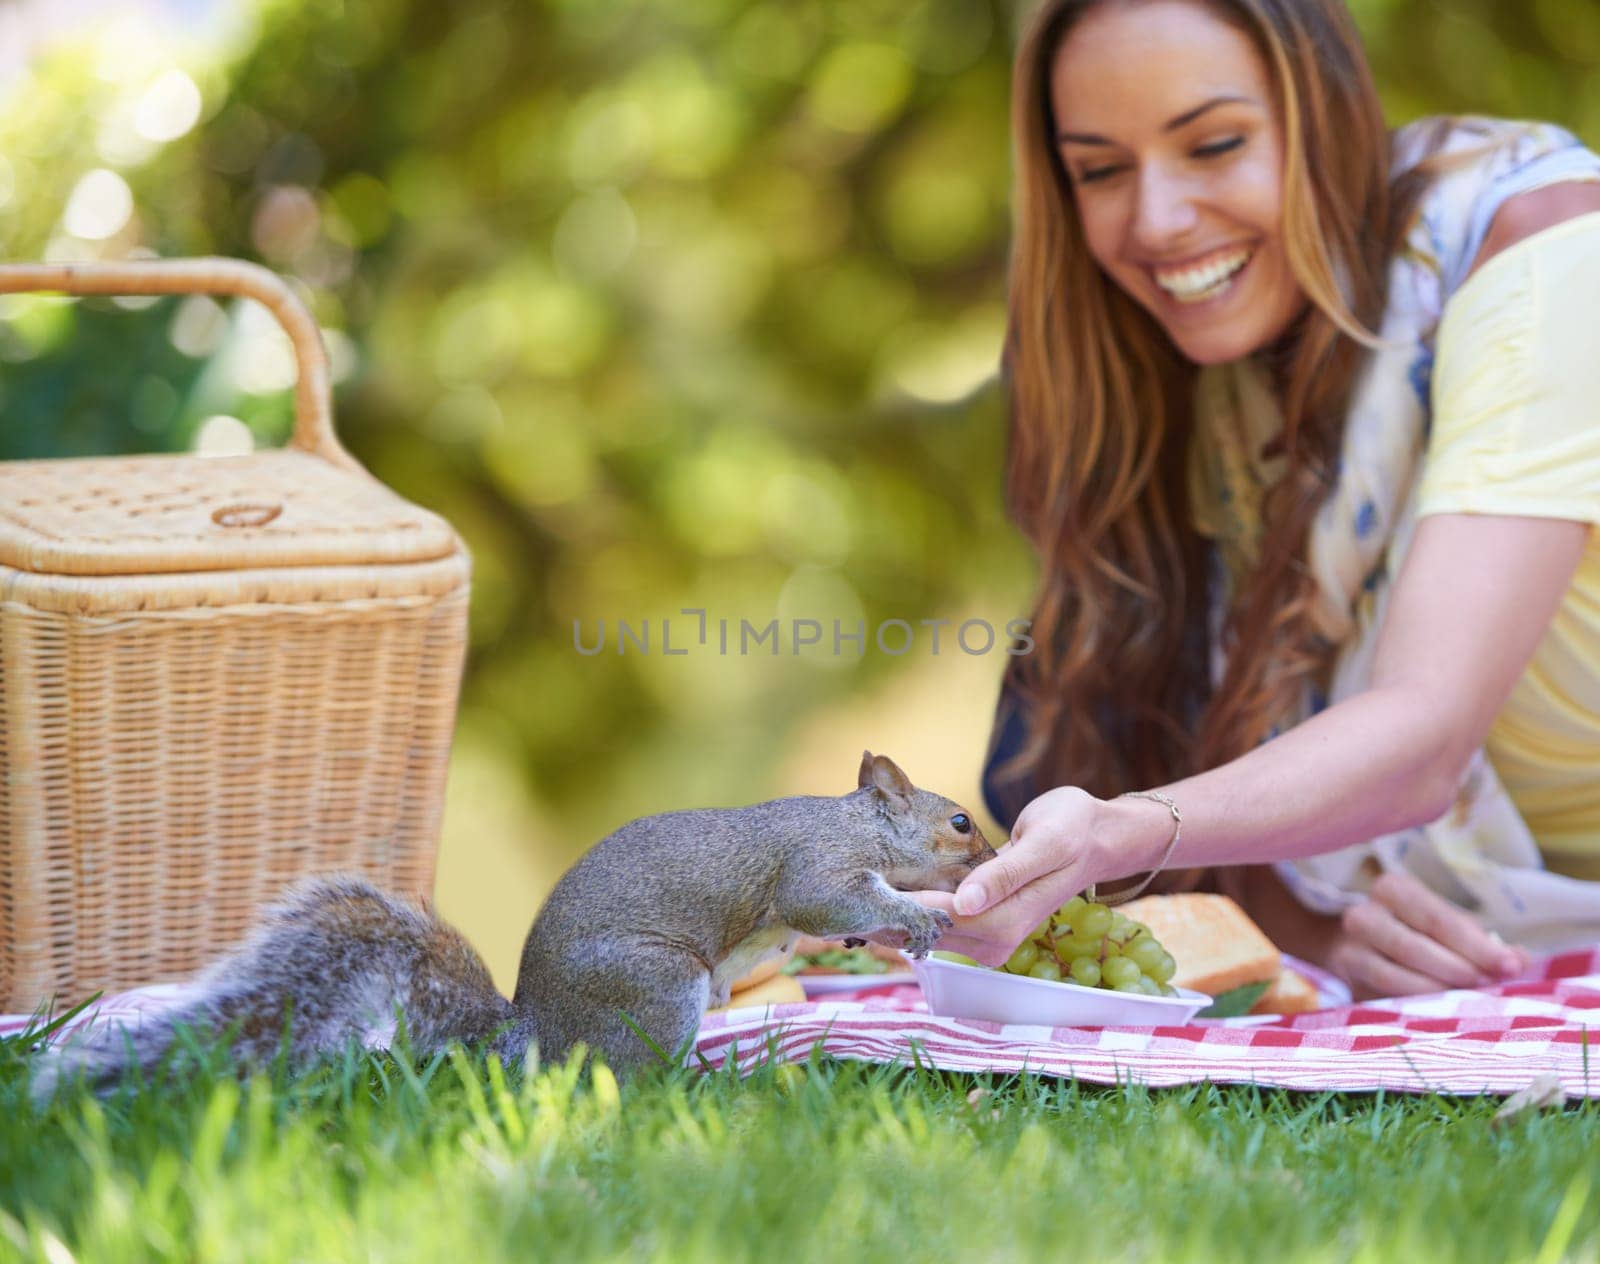 Woman, squirrel and happy with picnic in nature to relax, grass and park for peace outdoors in environment. Female person, chipmunk and lawn with basket for food, smile and calm with animal